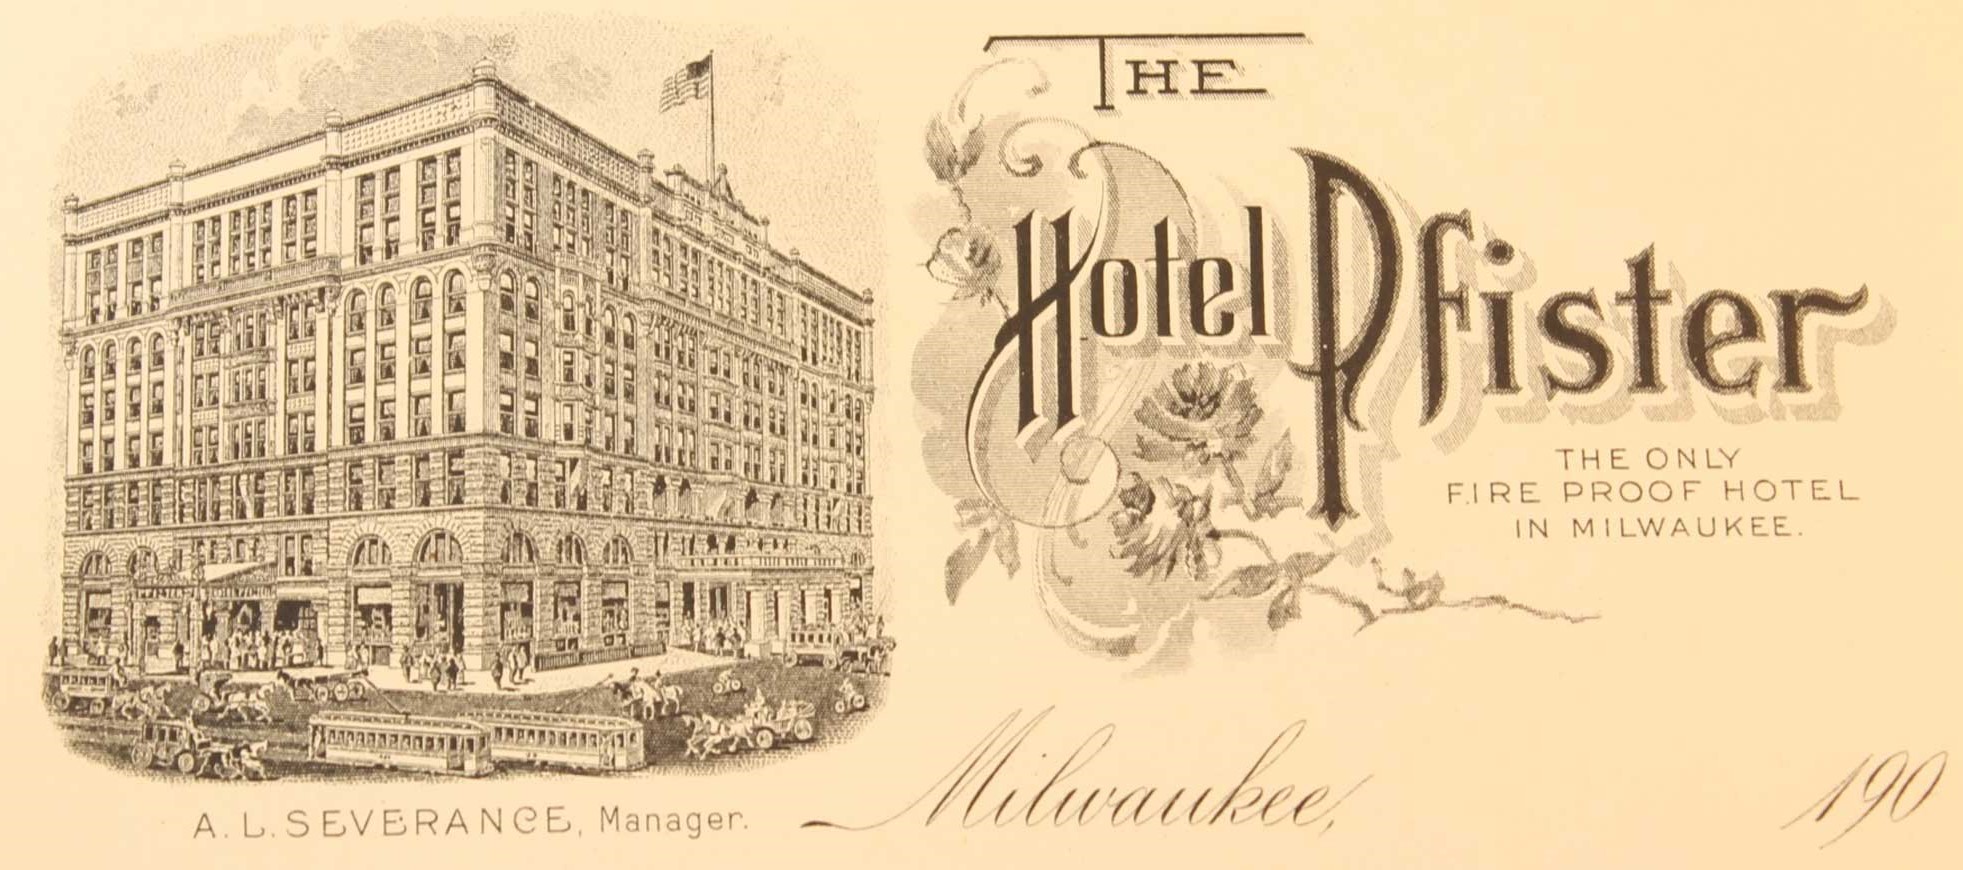 Historical Image of Advertisement, The Pfister Hotel, 1893, Member of Historic Hotels of America, in Milwaukee, Wisconsin